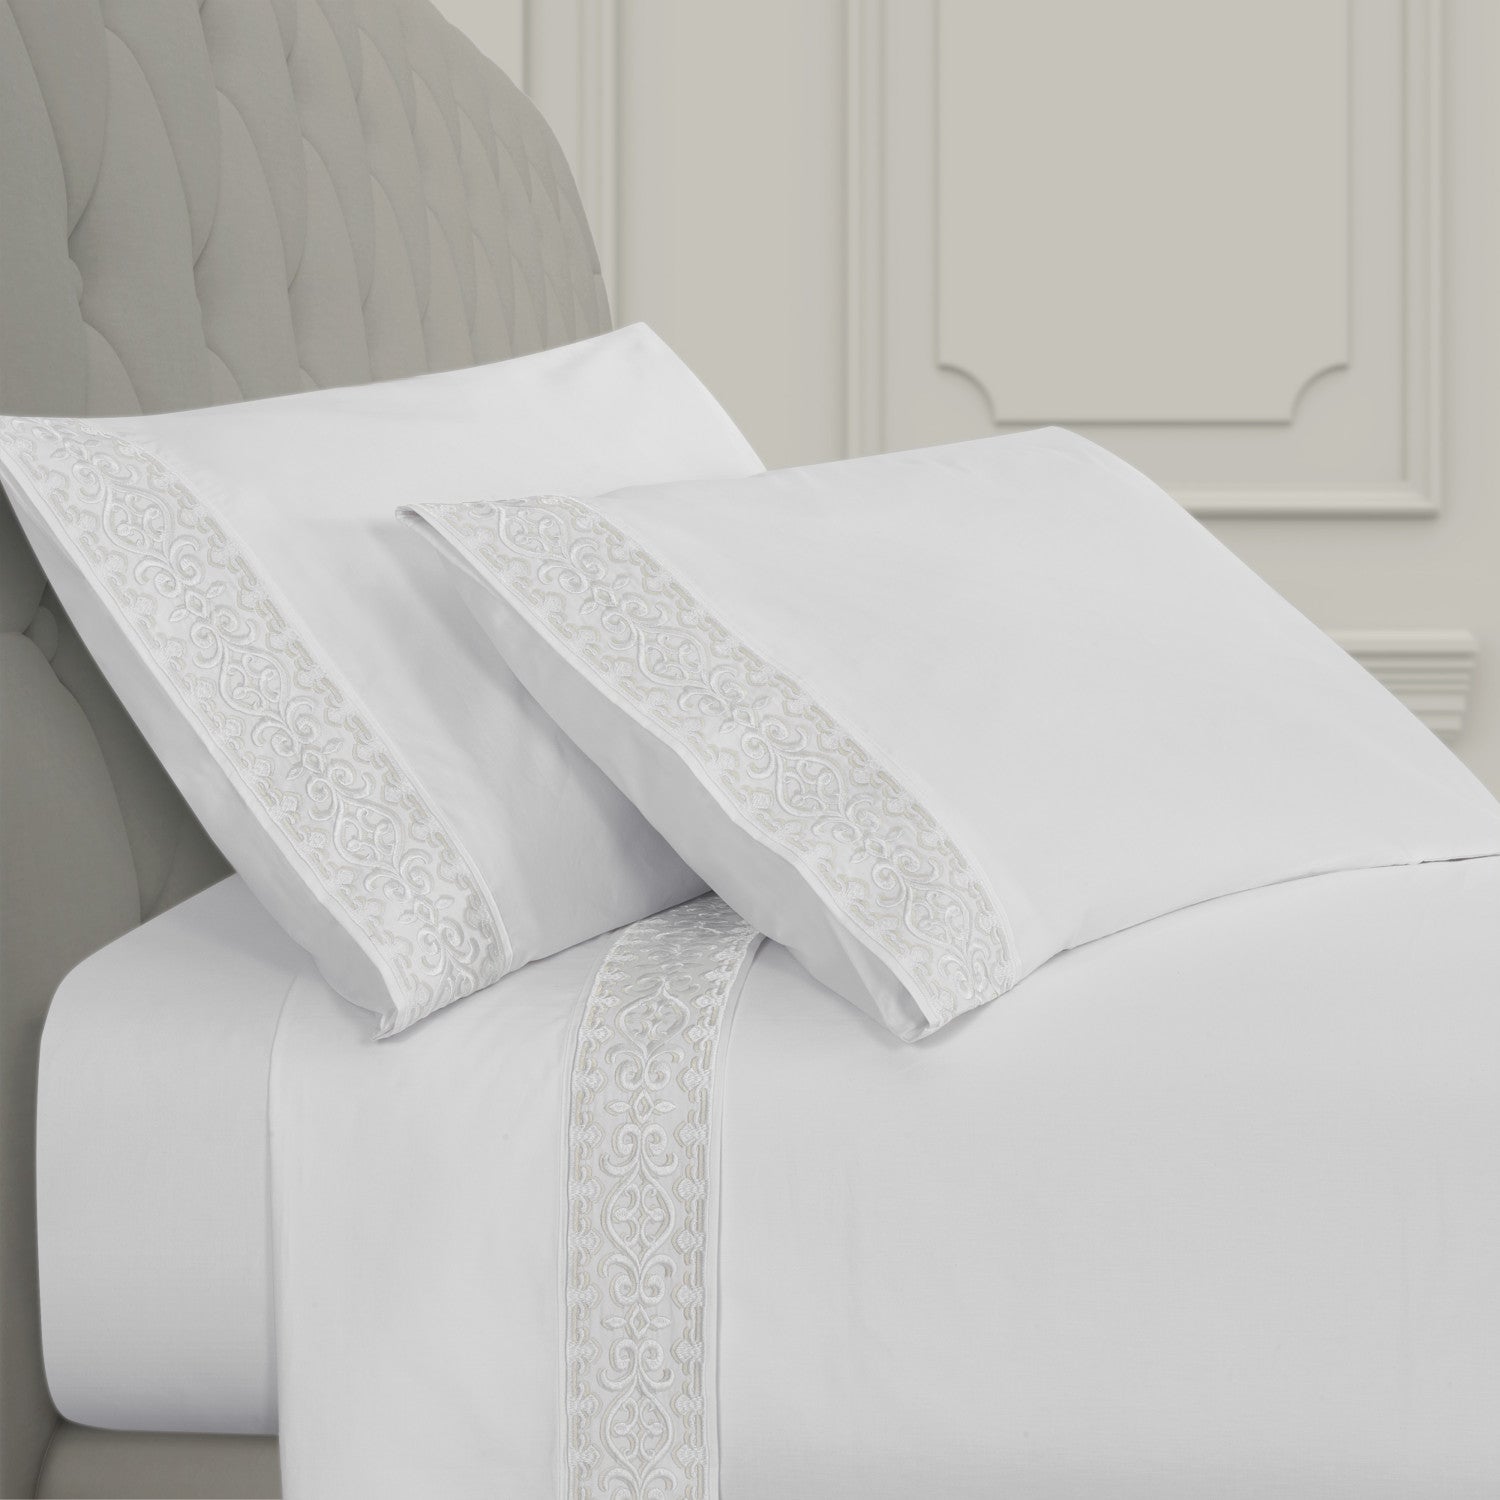 J. Queen New York Majestic Embroidered Sheet Set, Queen, White